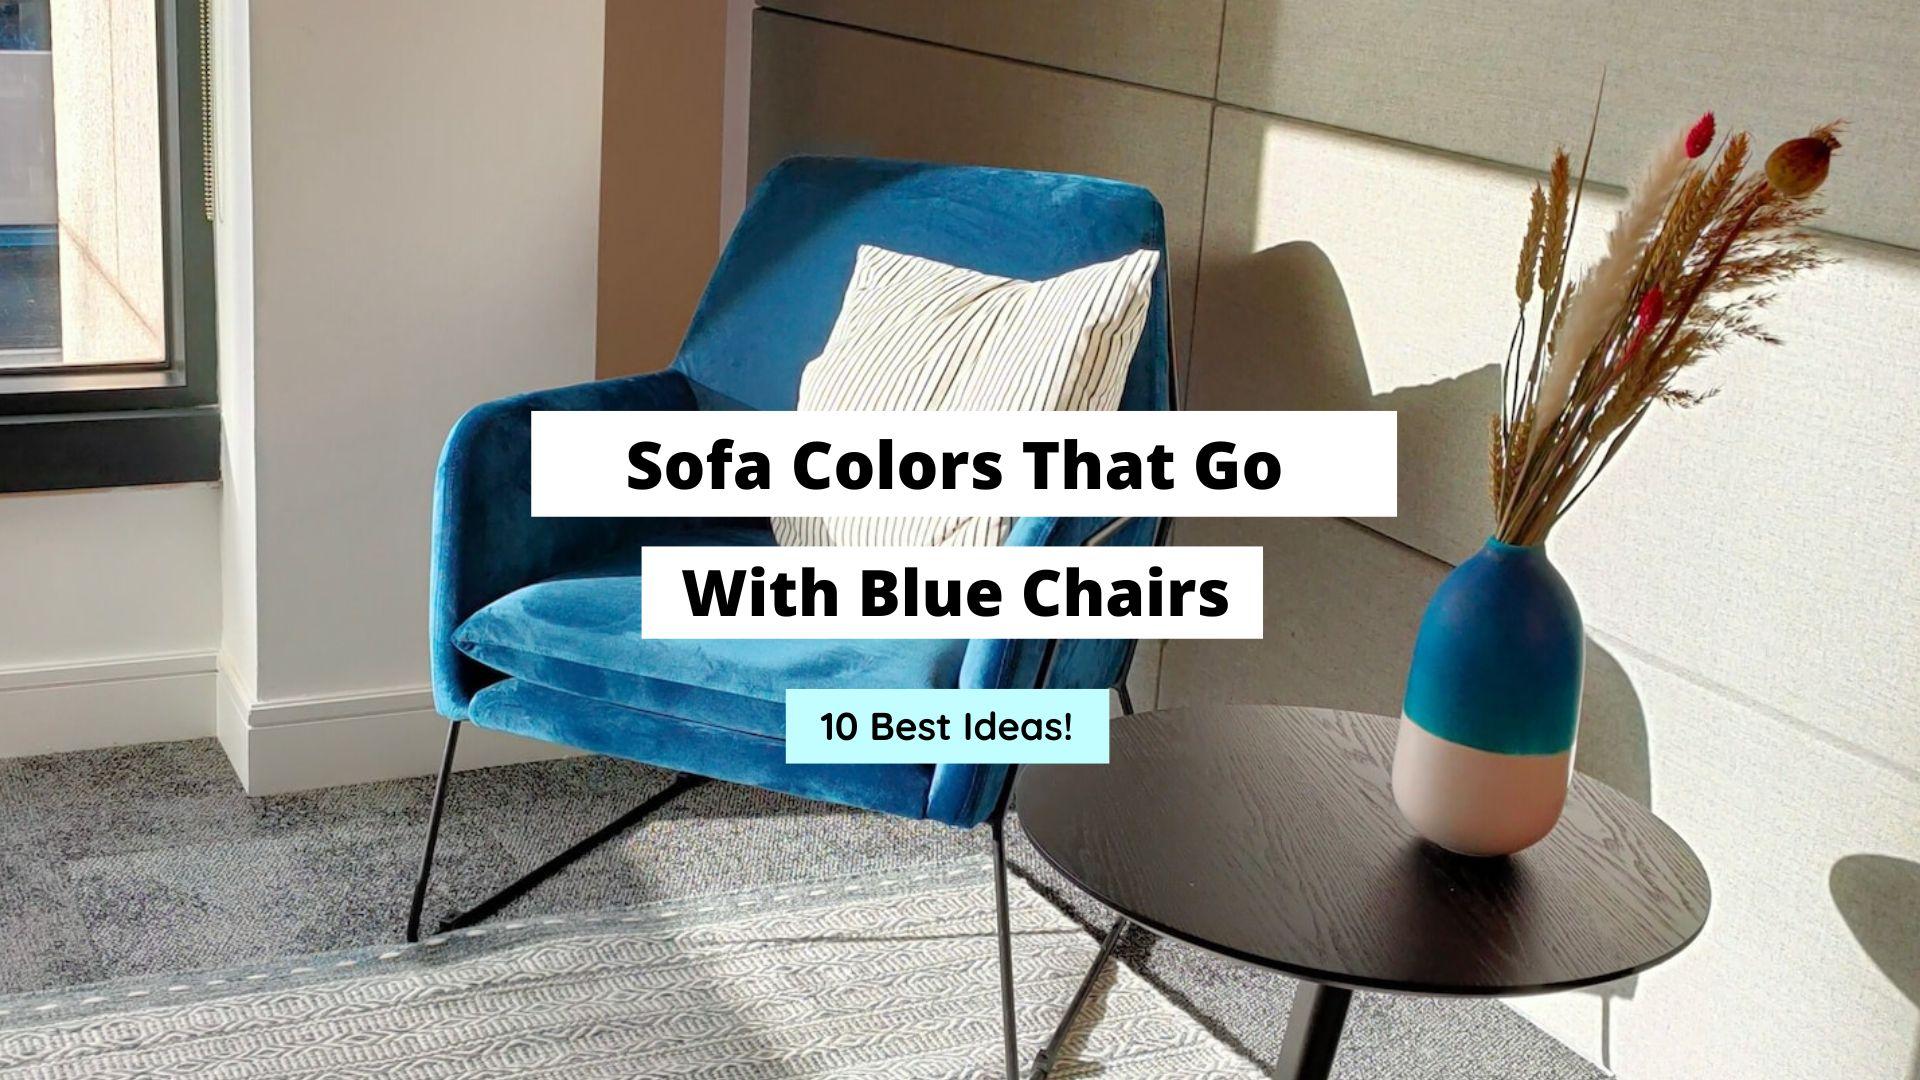 Sofa Colors That Go With Blue Chairs